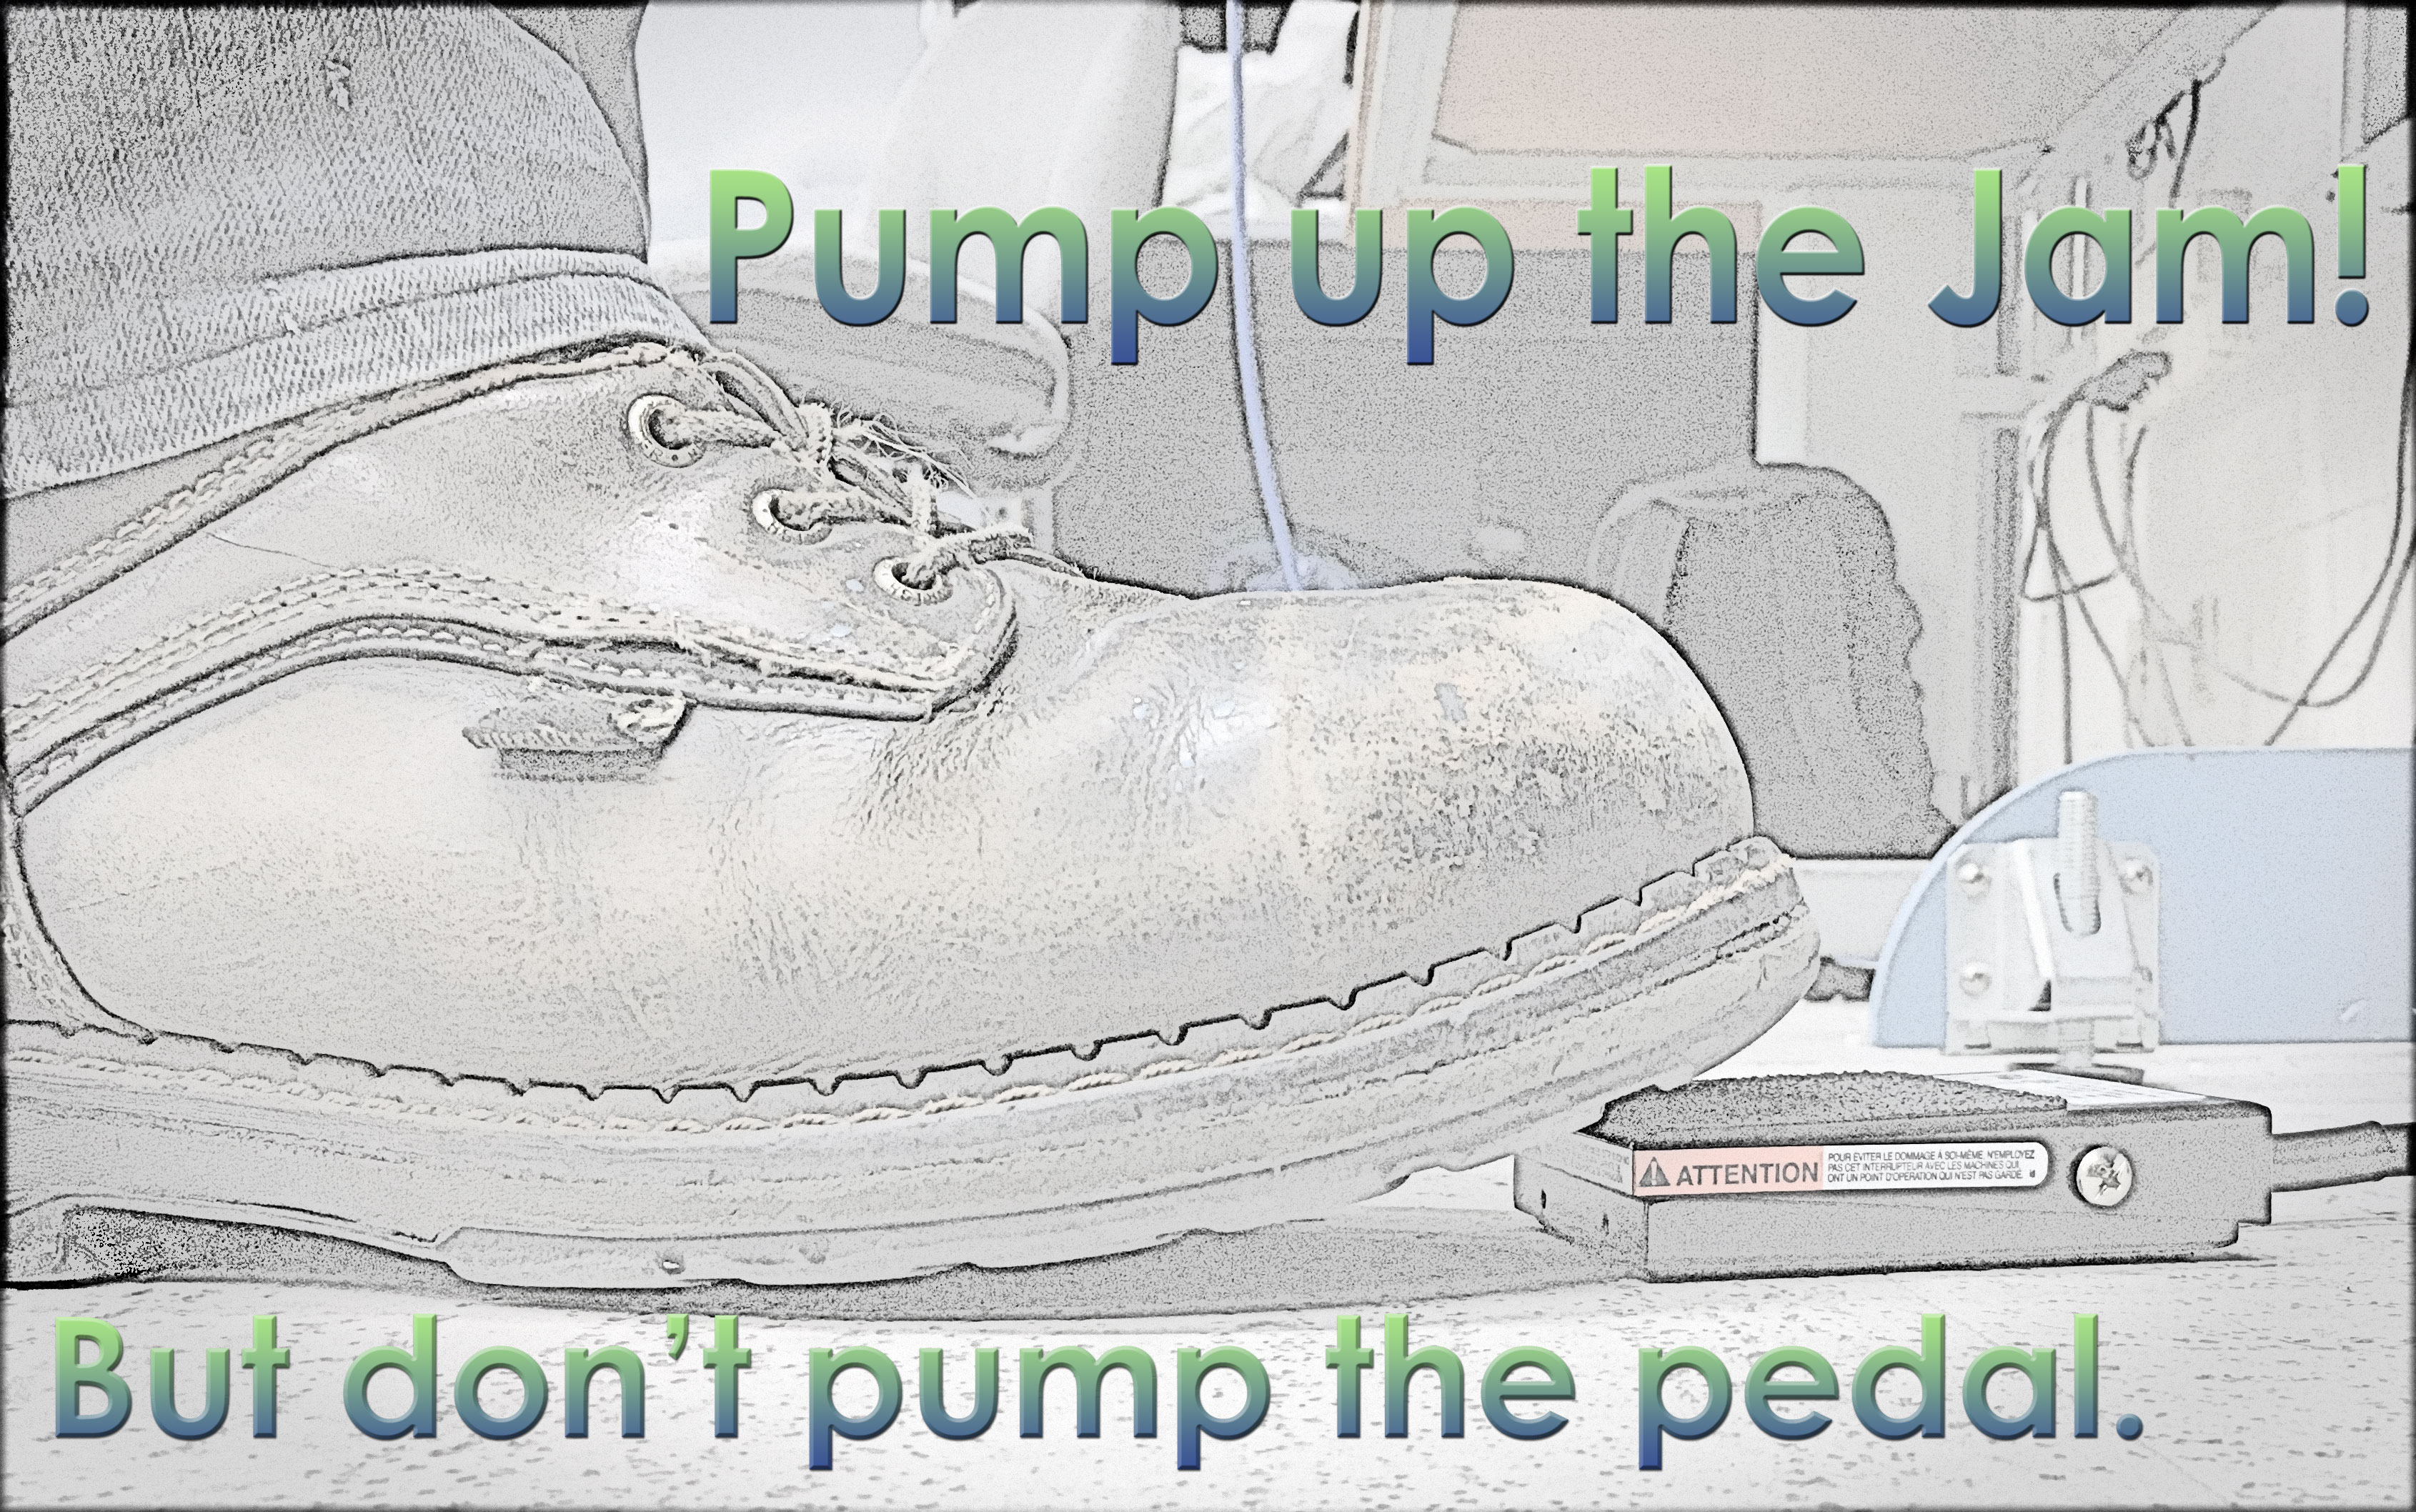 Pedal pumping an AccuFlo or MicroBlaster is damaging and inefficient.